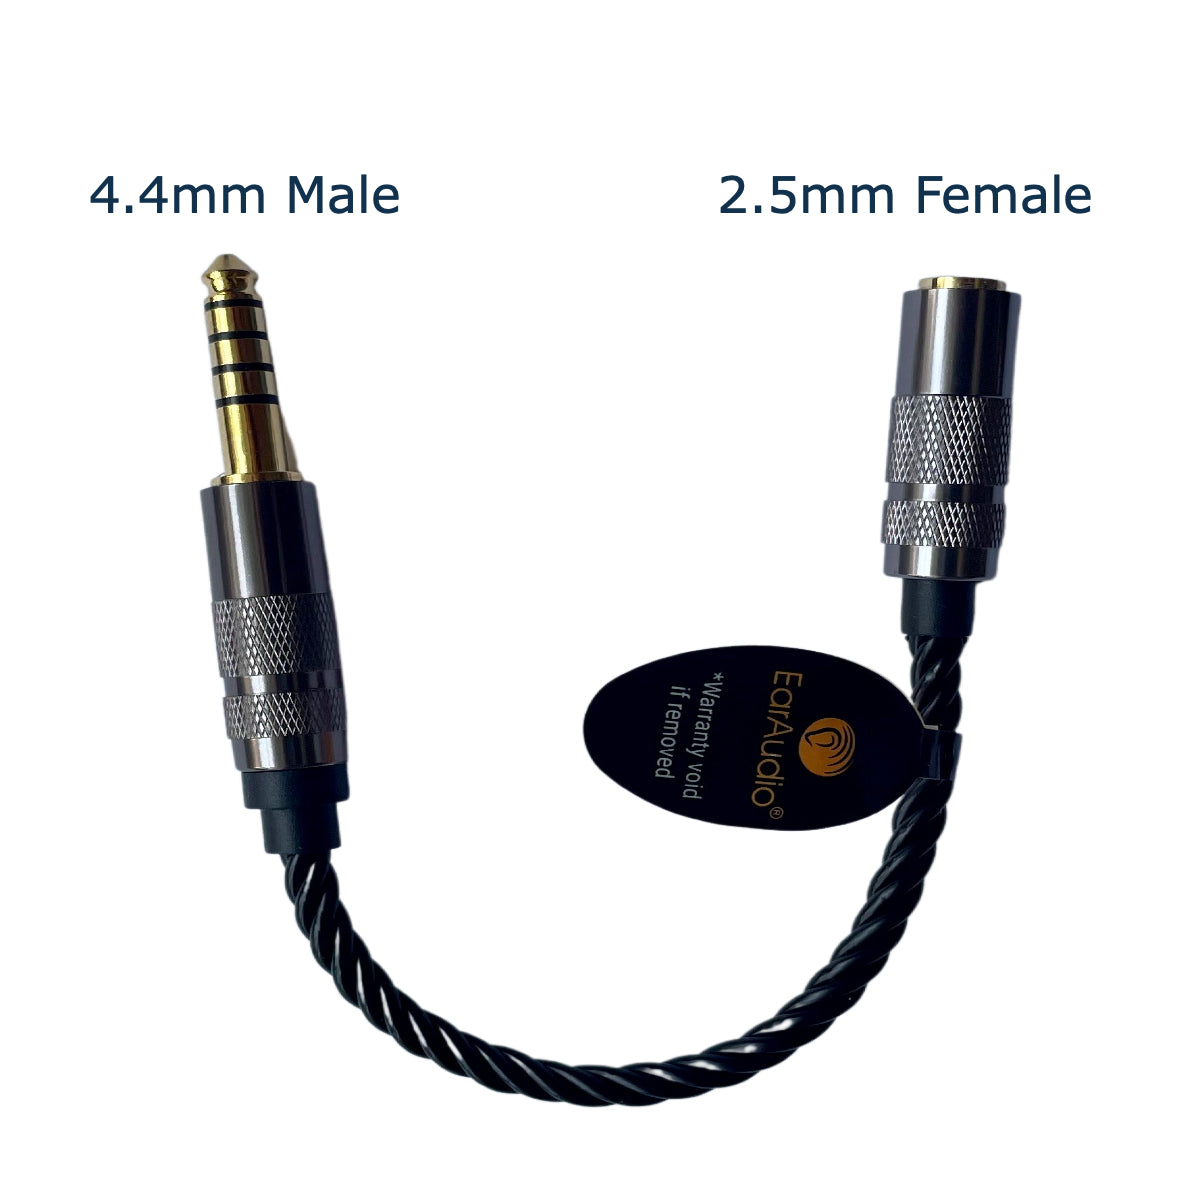 EarAudio 4.4mm Male to 2.5mm Female Adapter Cable